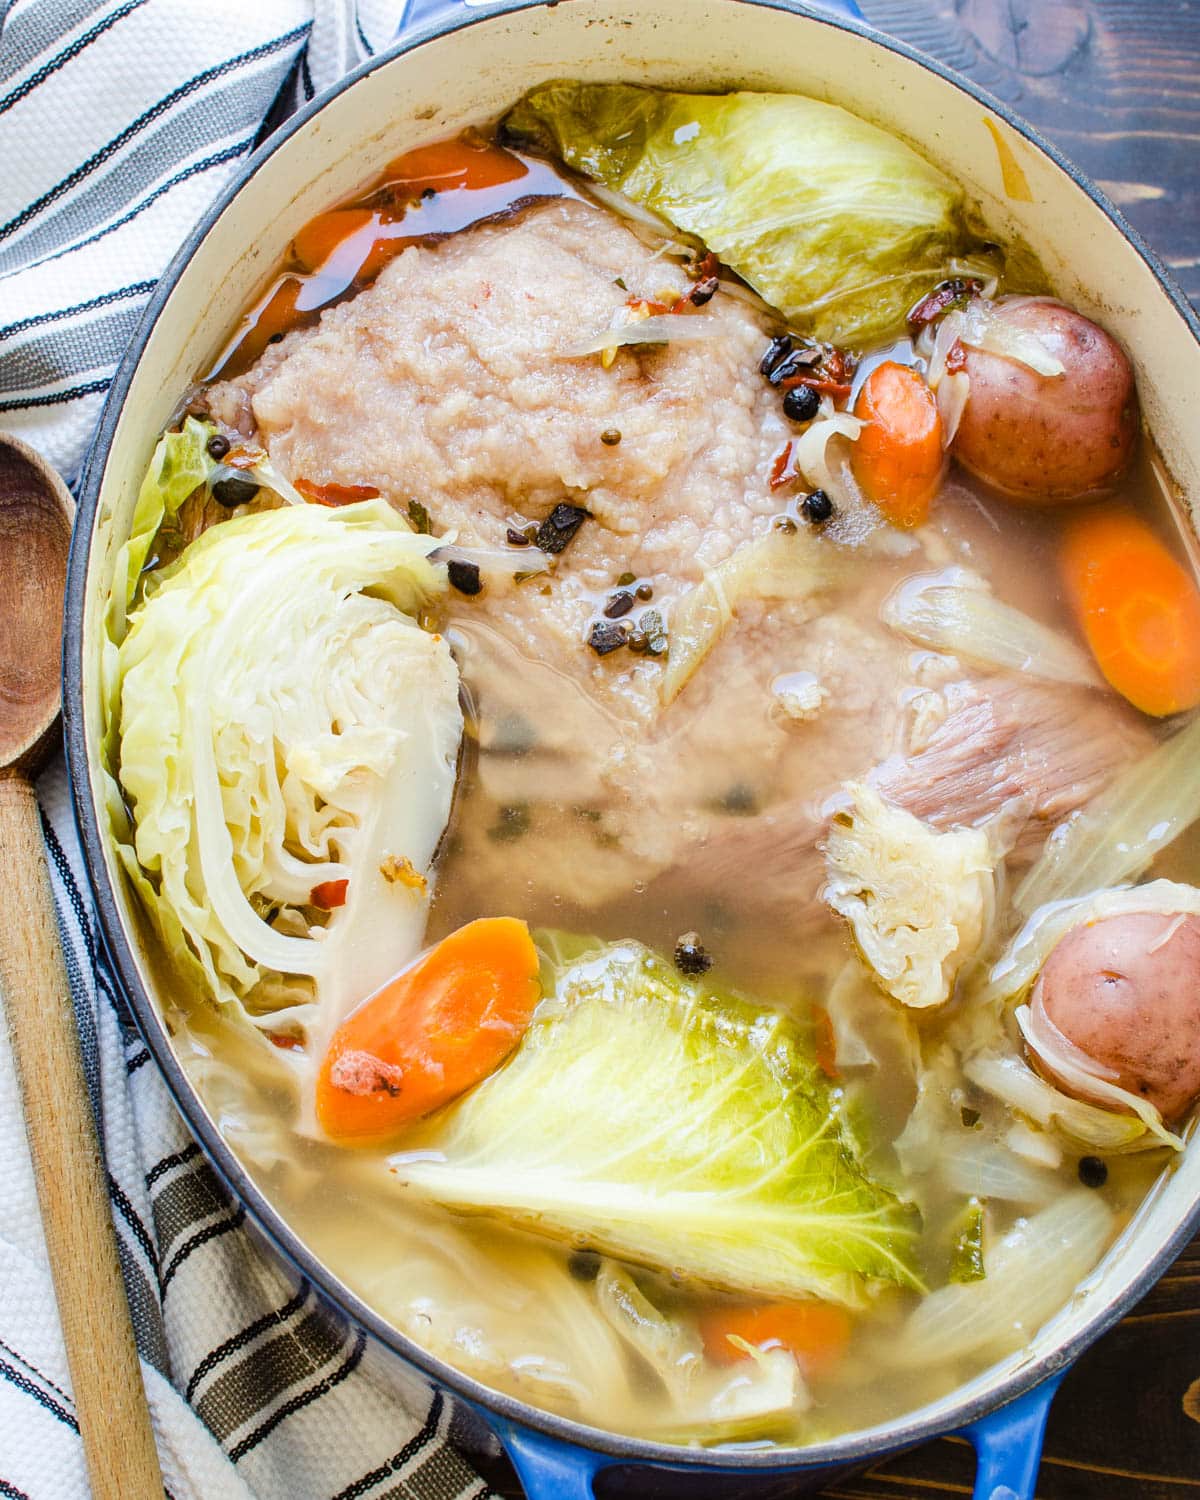 A pot of boiled corned beef with cabbage, potatoes and carrots.